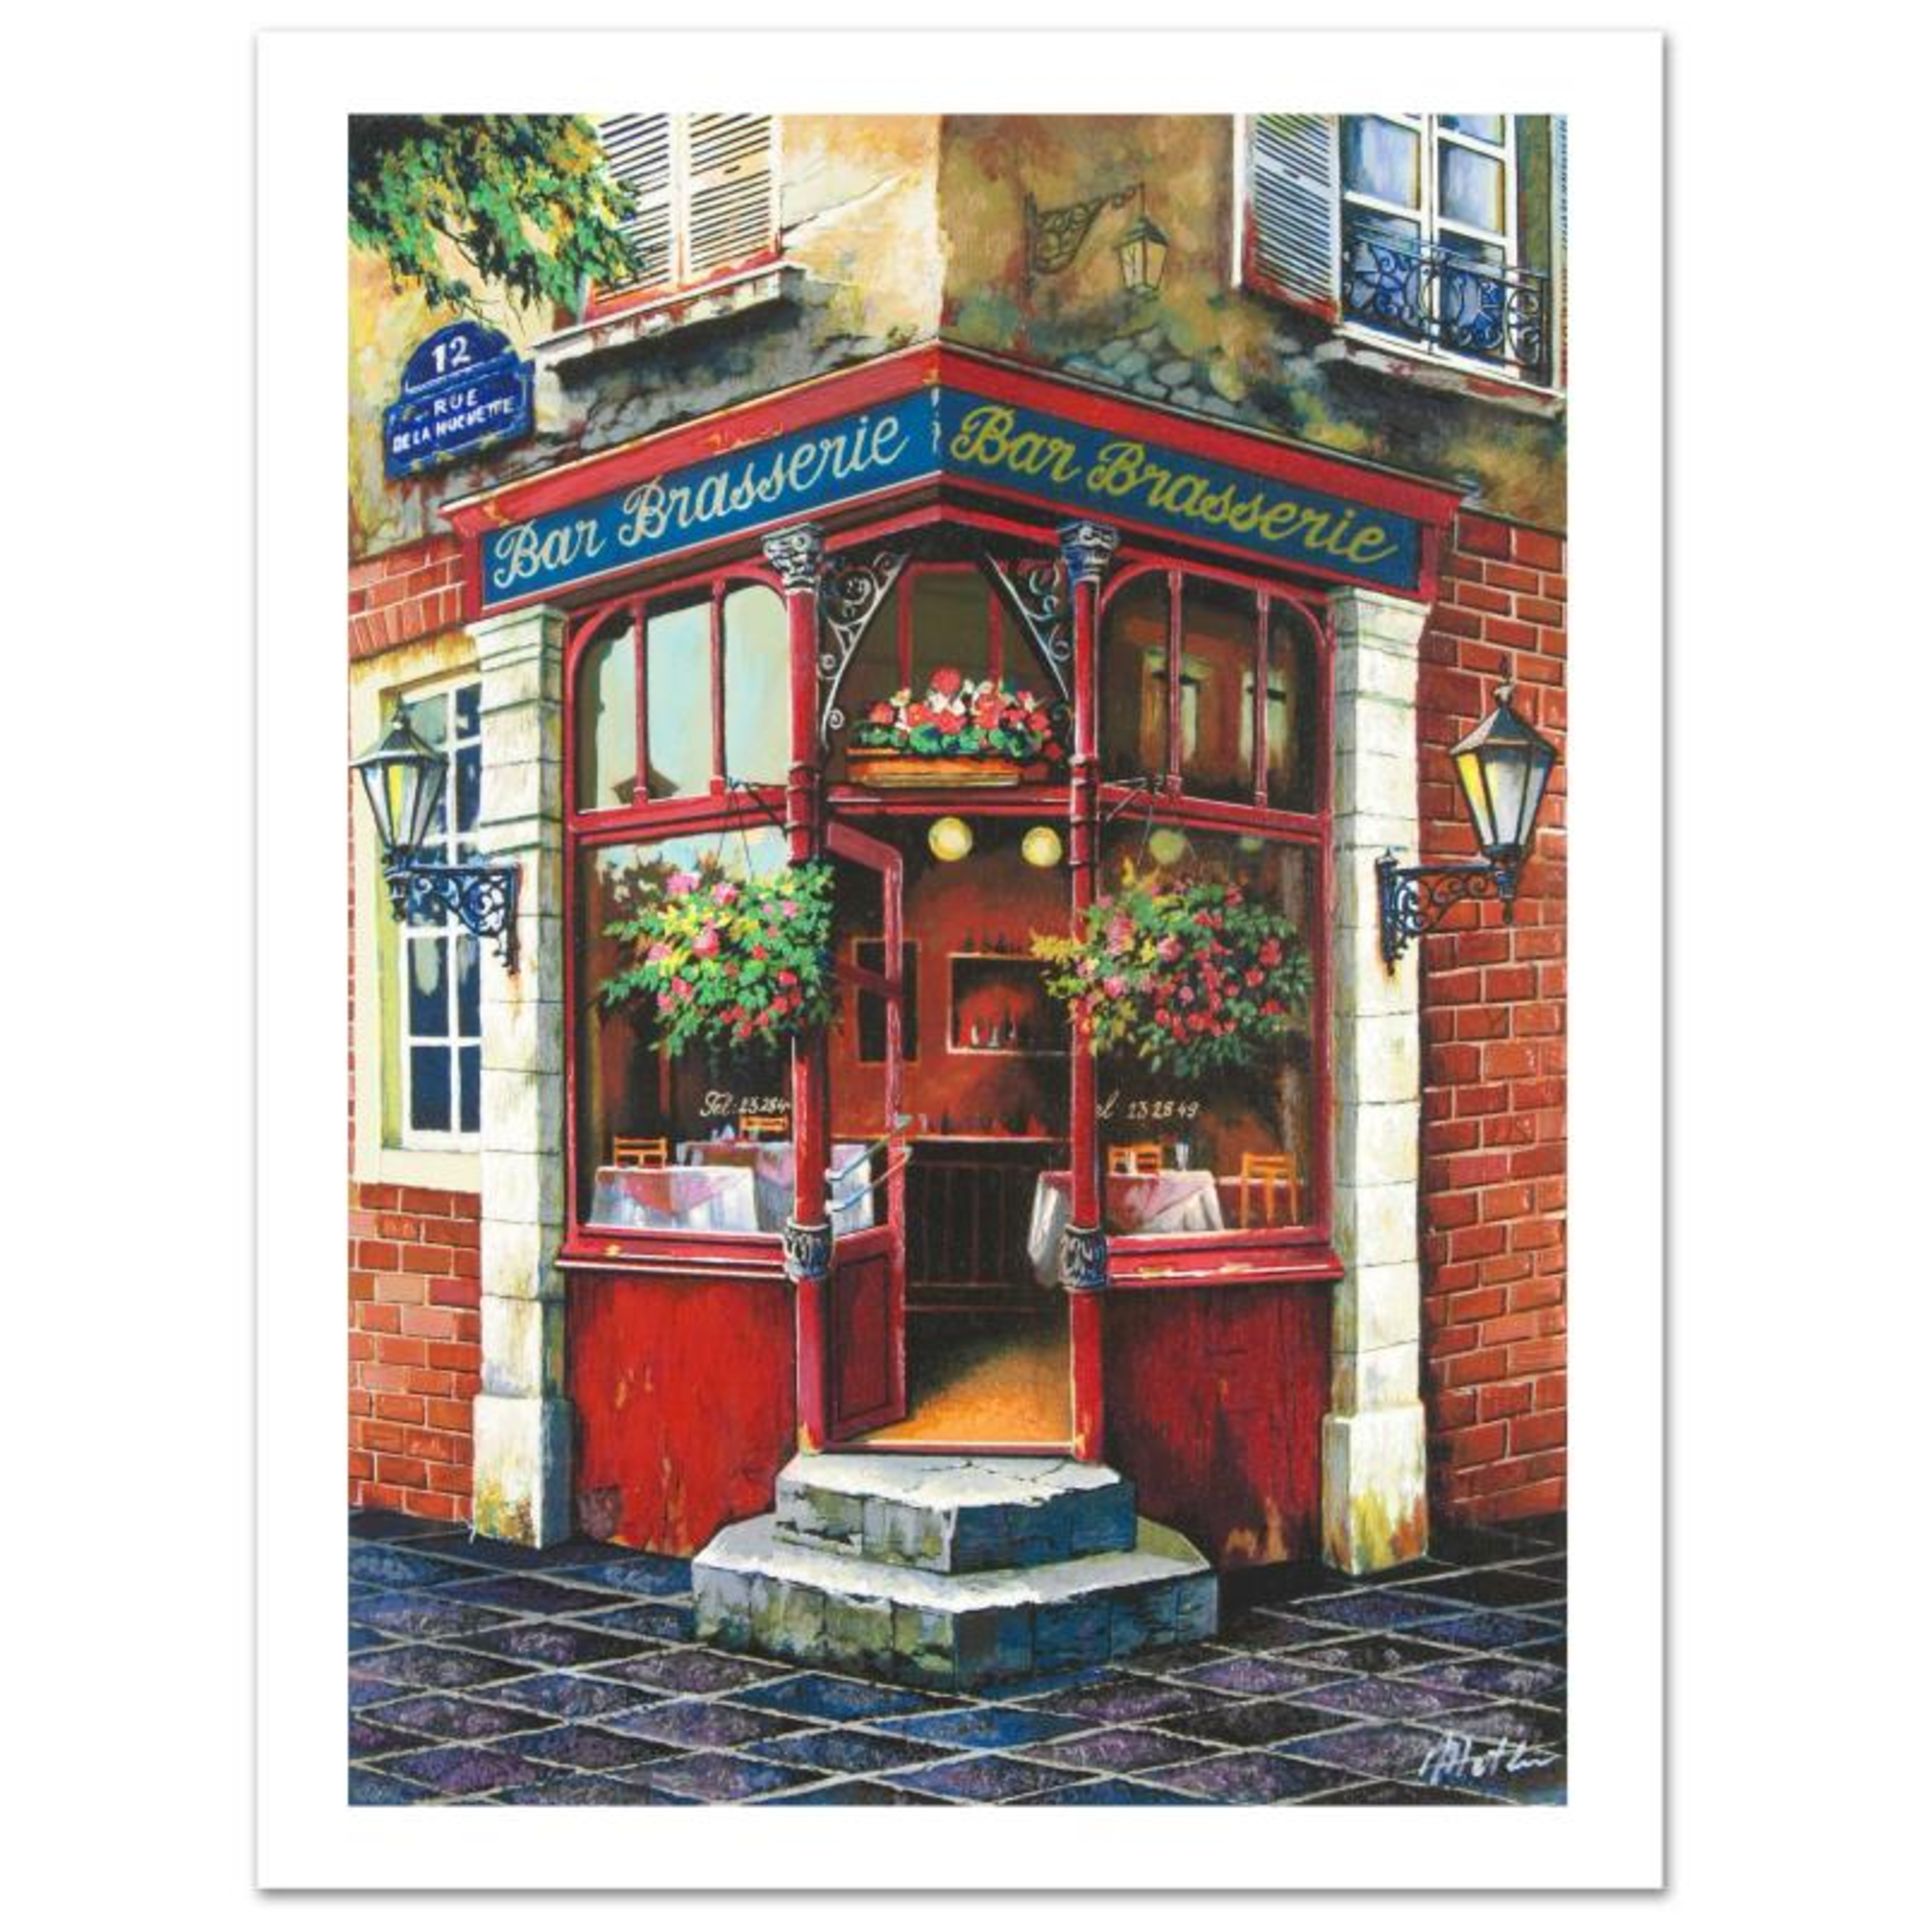 Anatoly Metlan, "Bar Brasserie" Limited Edition Serigraph, Numbered and Hand Sig